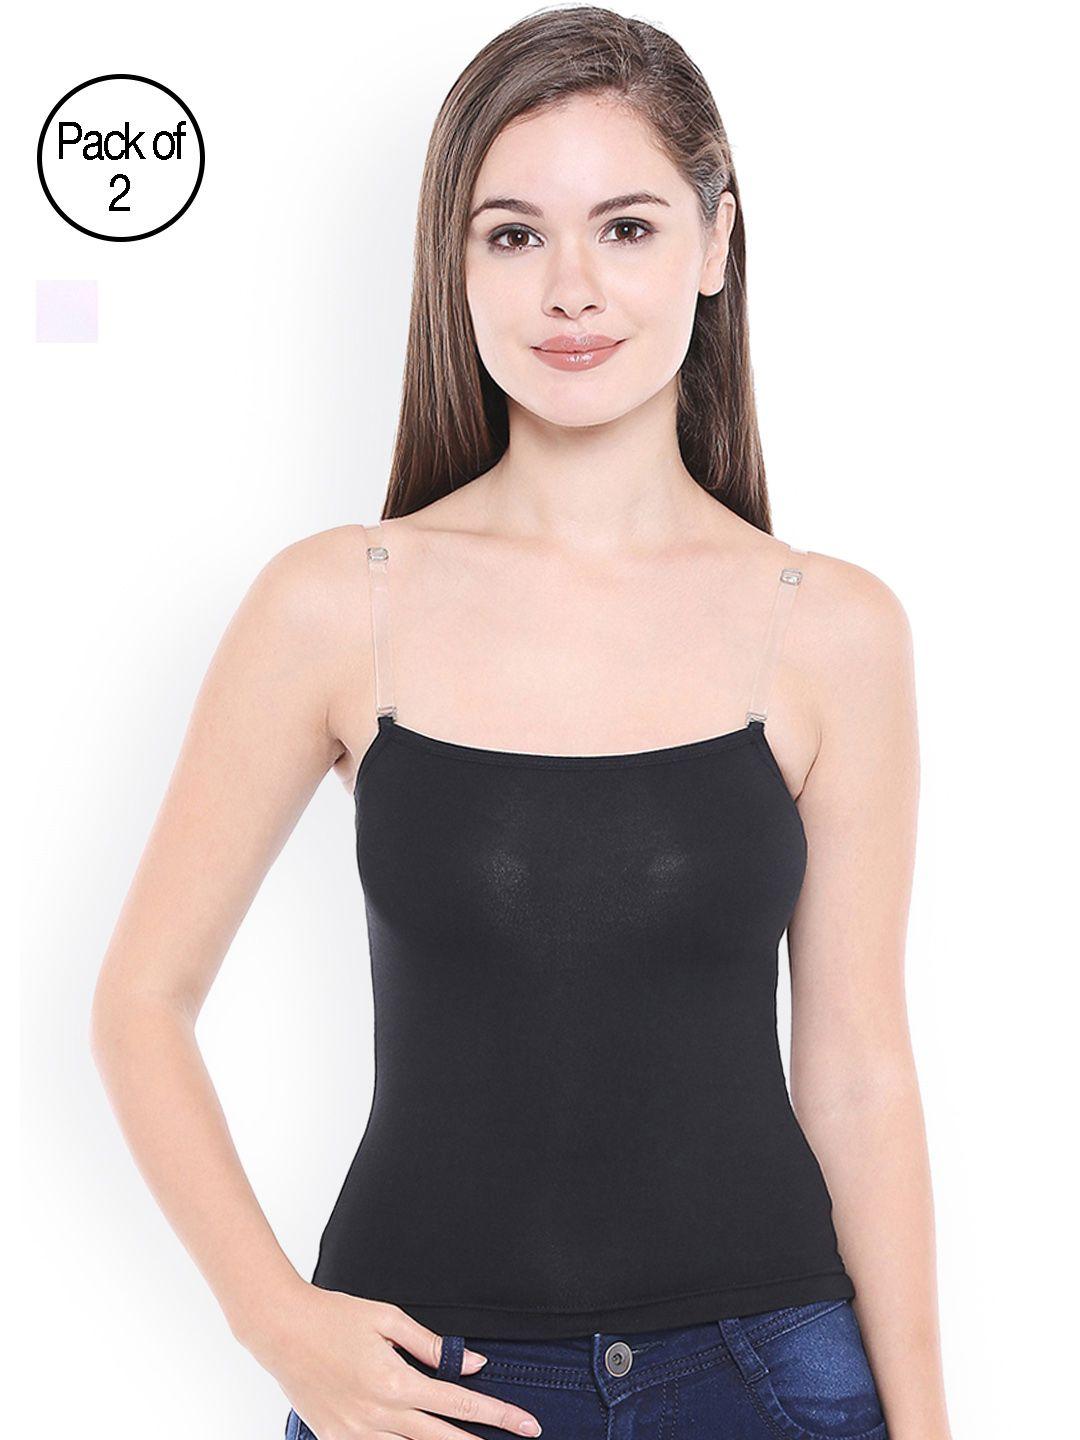 bodycare-women-black-&-white-solid-pack-of-2-slim-fit-camisoles-e68bw